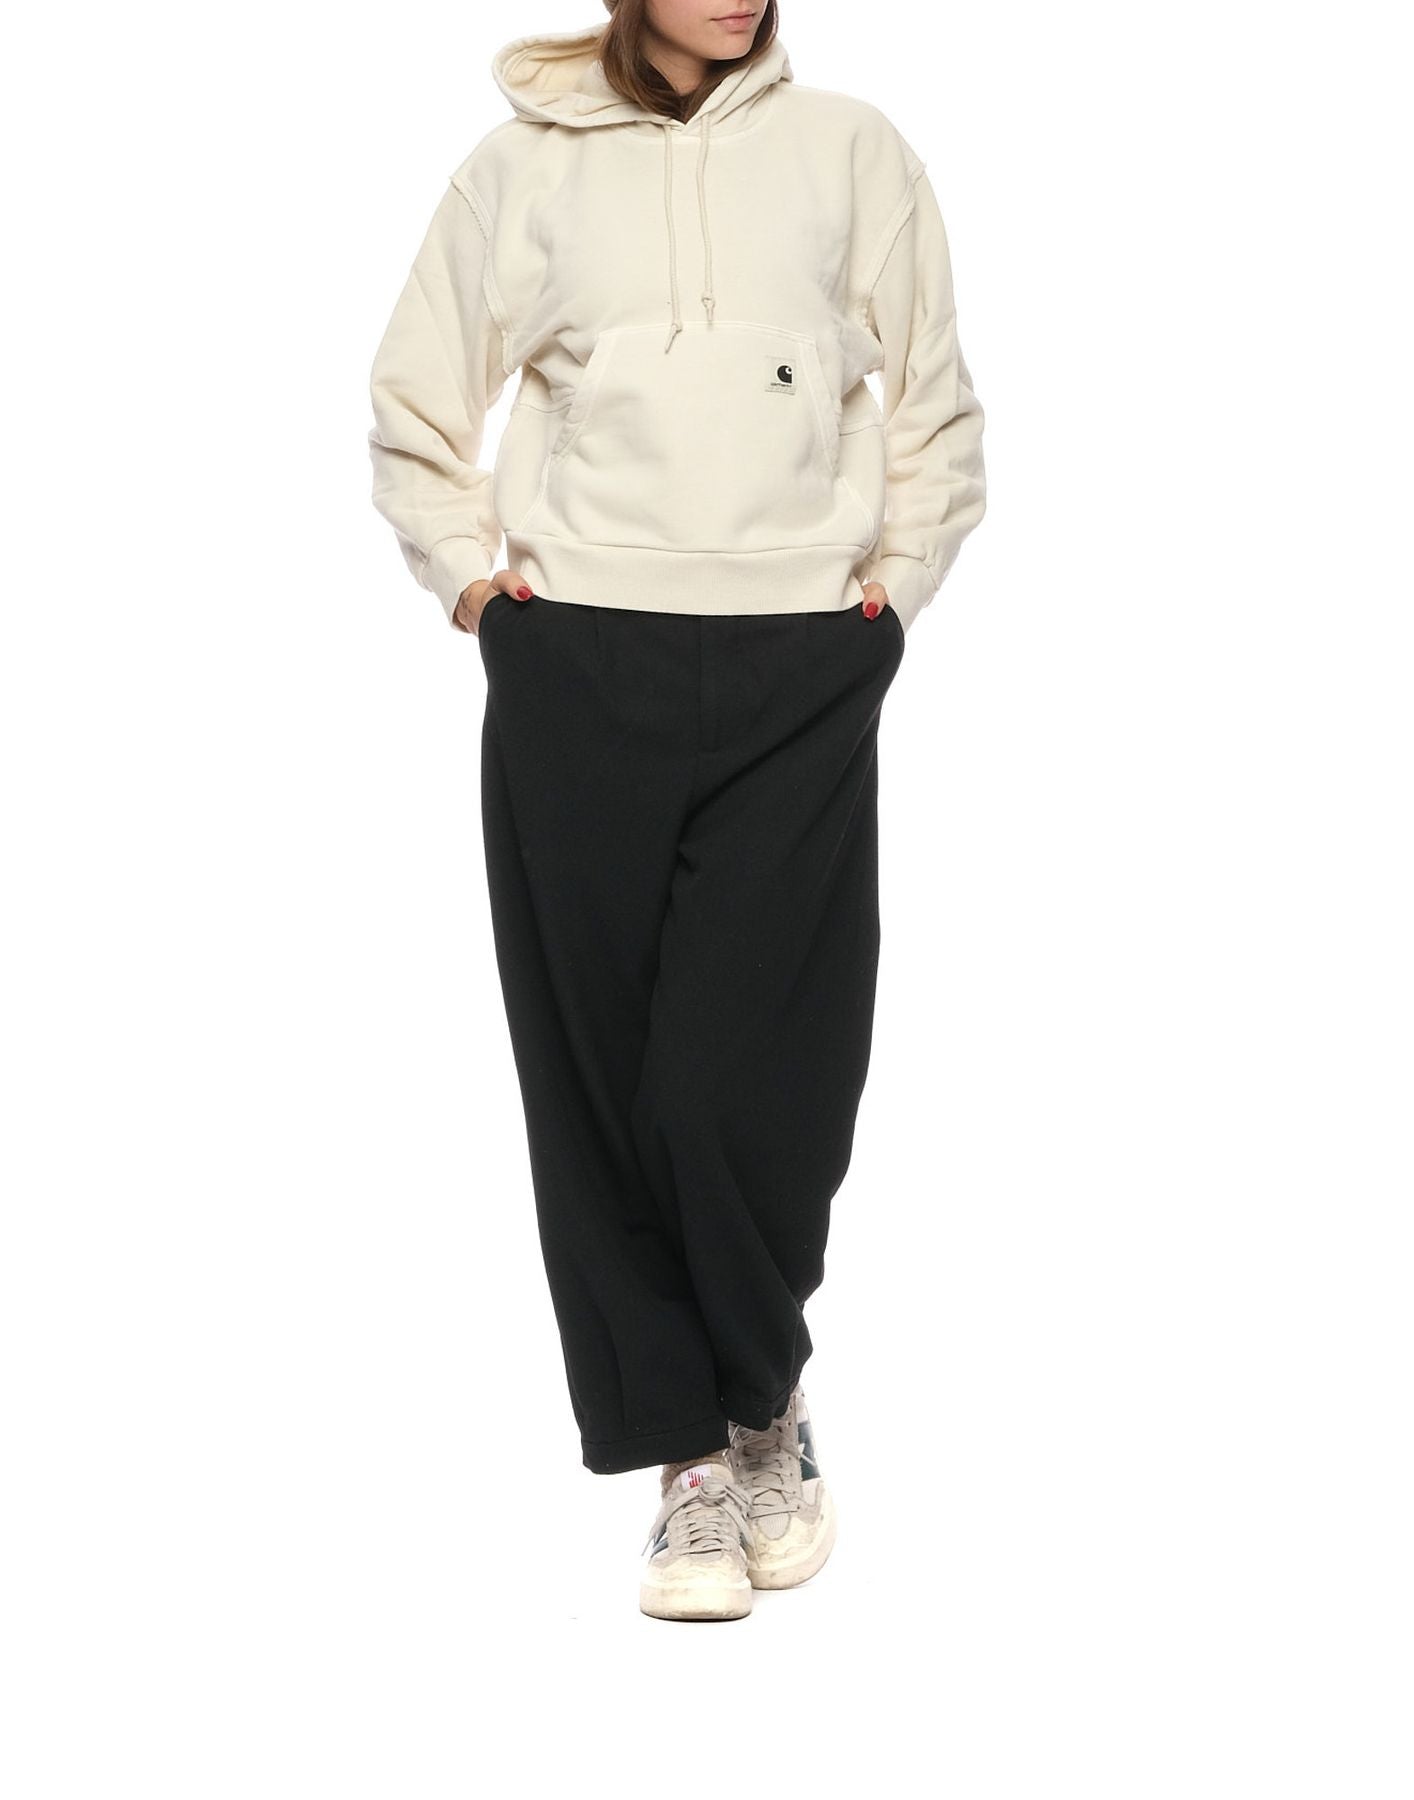 Hoodie for woman I031385 26 NATURAL CARHARTT